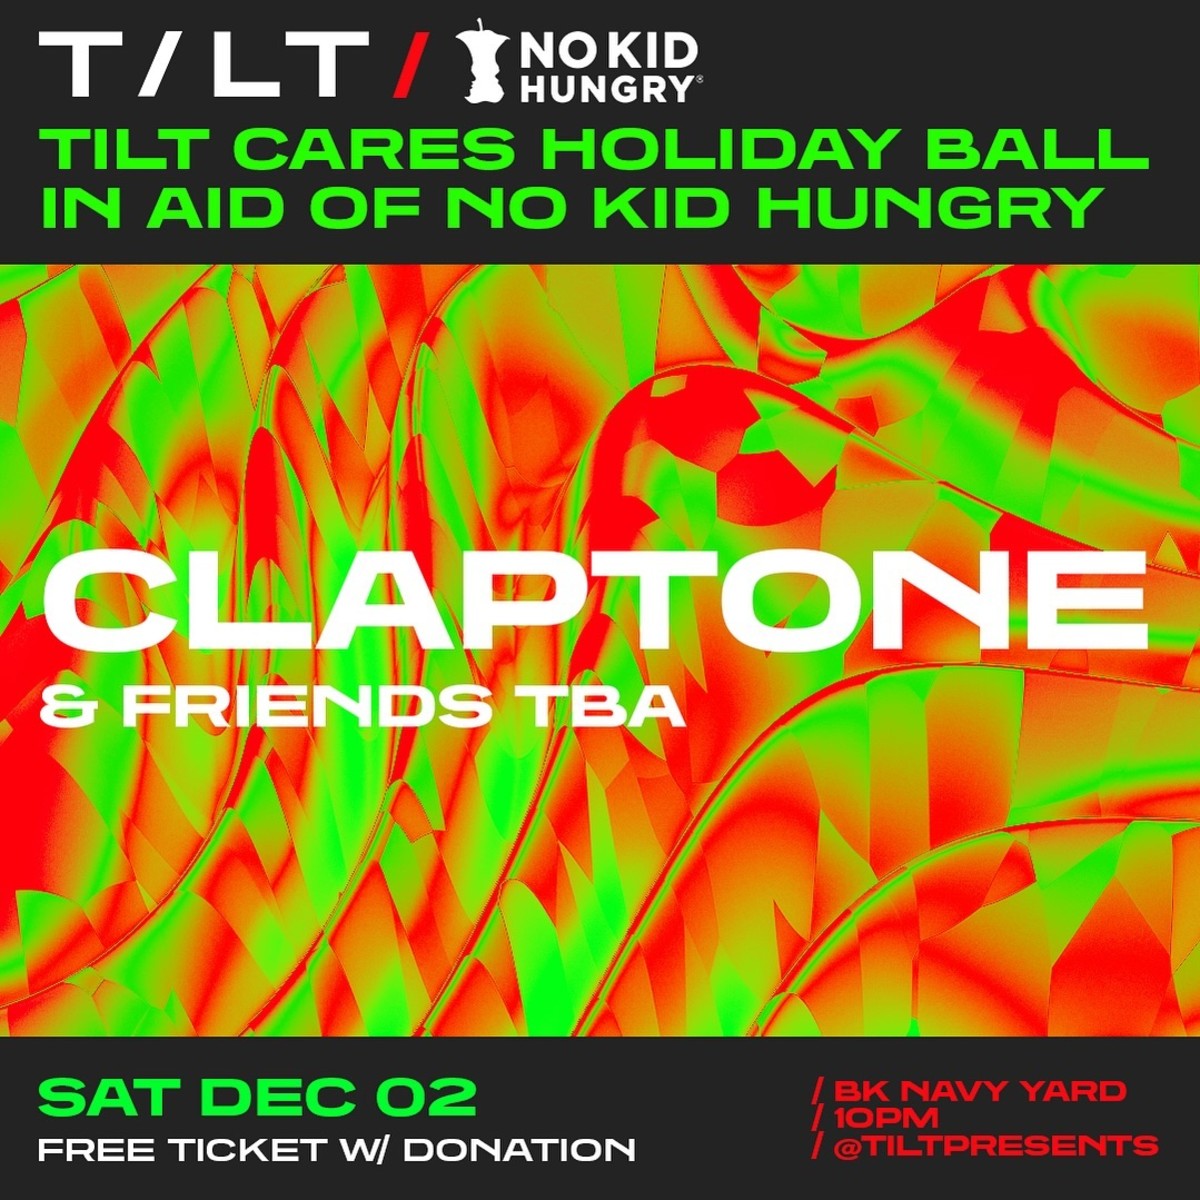 Claptone is headlining the "T / L T" holiday ball to support No Kid Hungry.